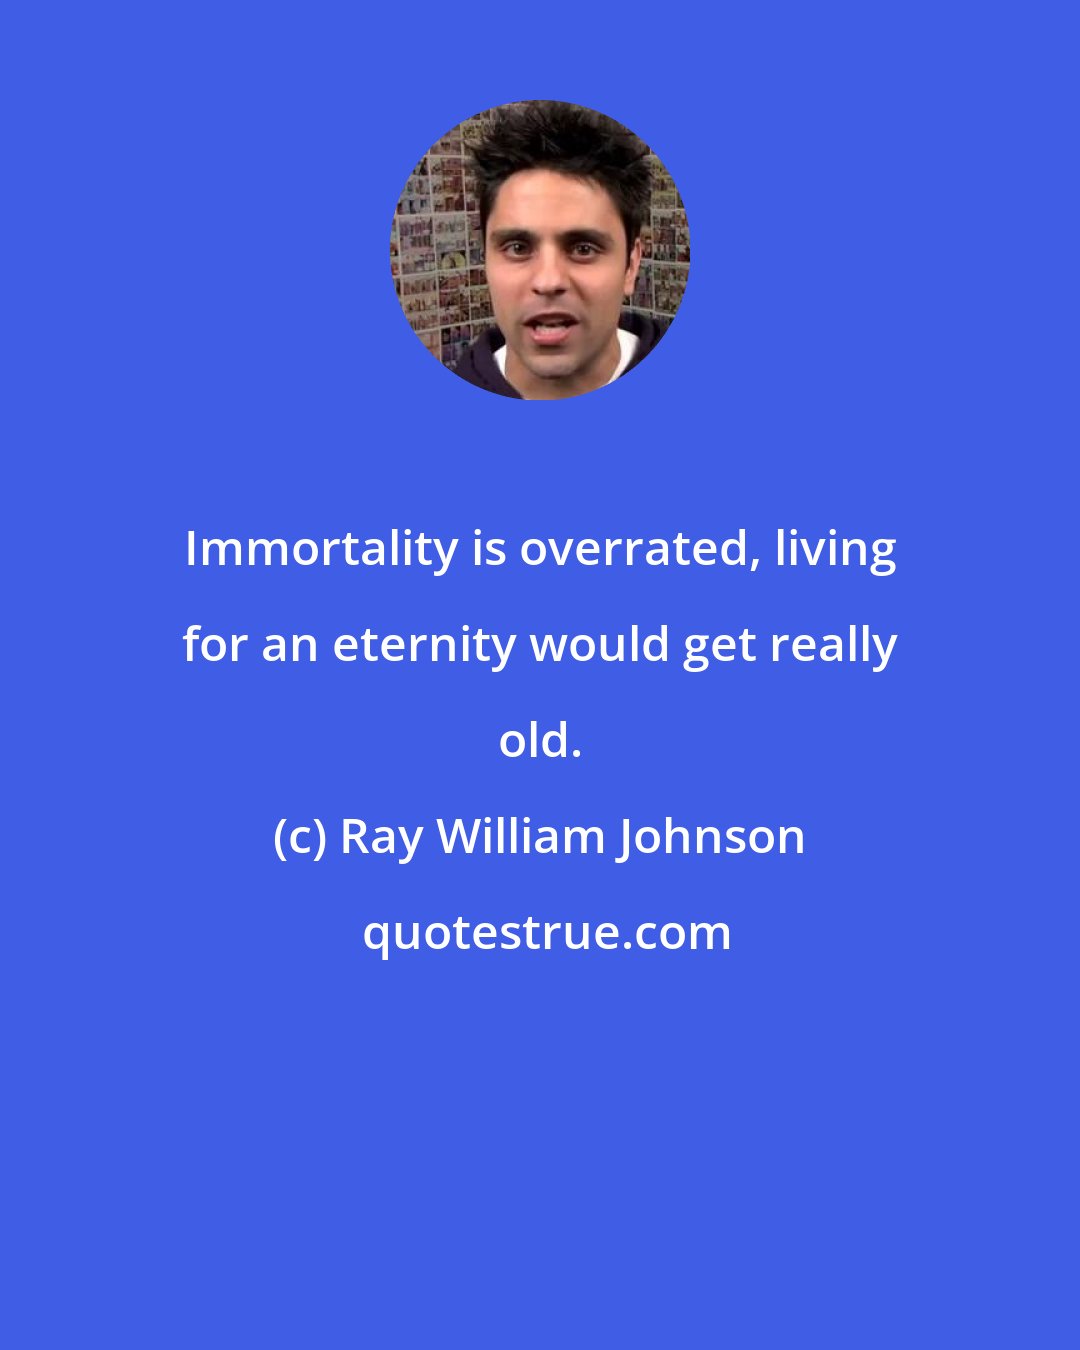 Ray William Johnson: Immortality is overrated, living for an eternity would get really old.